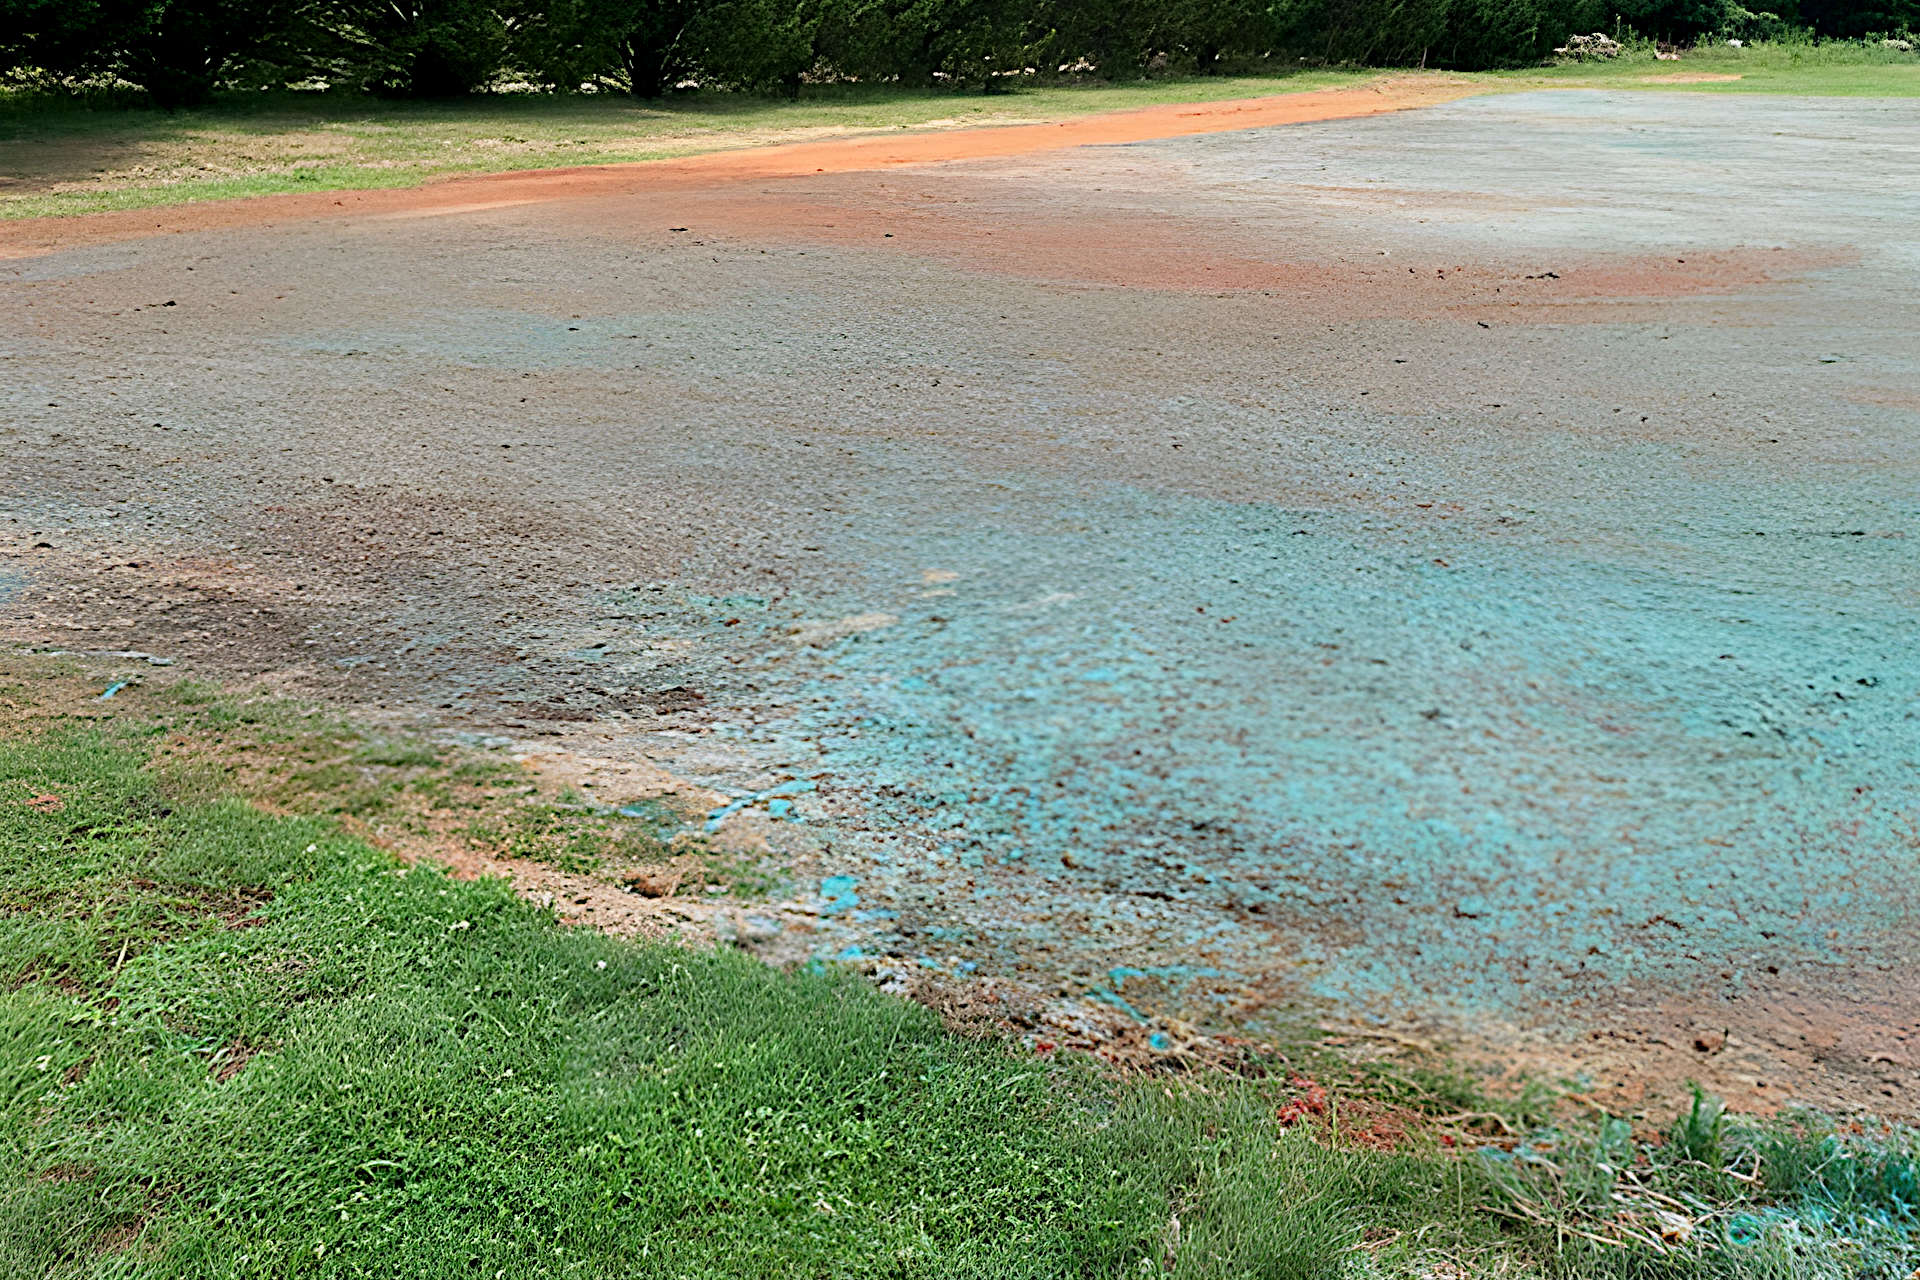 Sowing the Seeds of Change: Hydroseeding for Soil Stabilization and Erosion Control